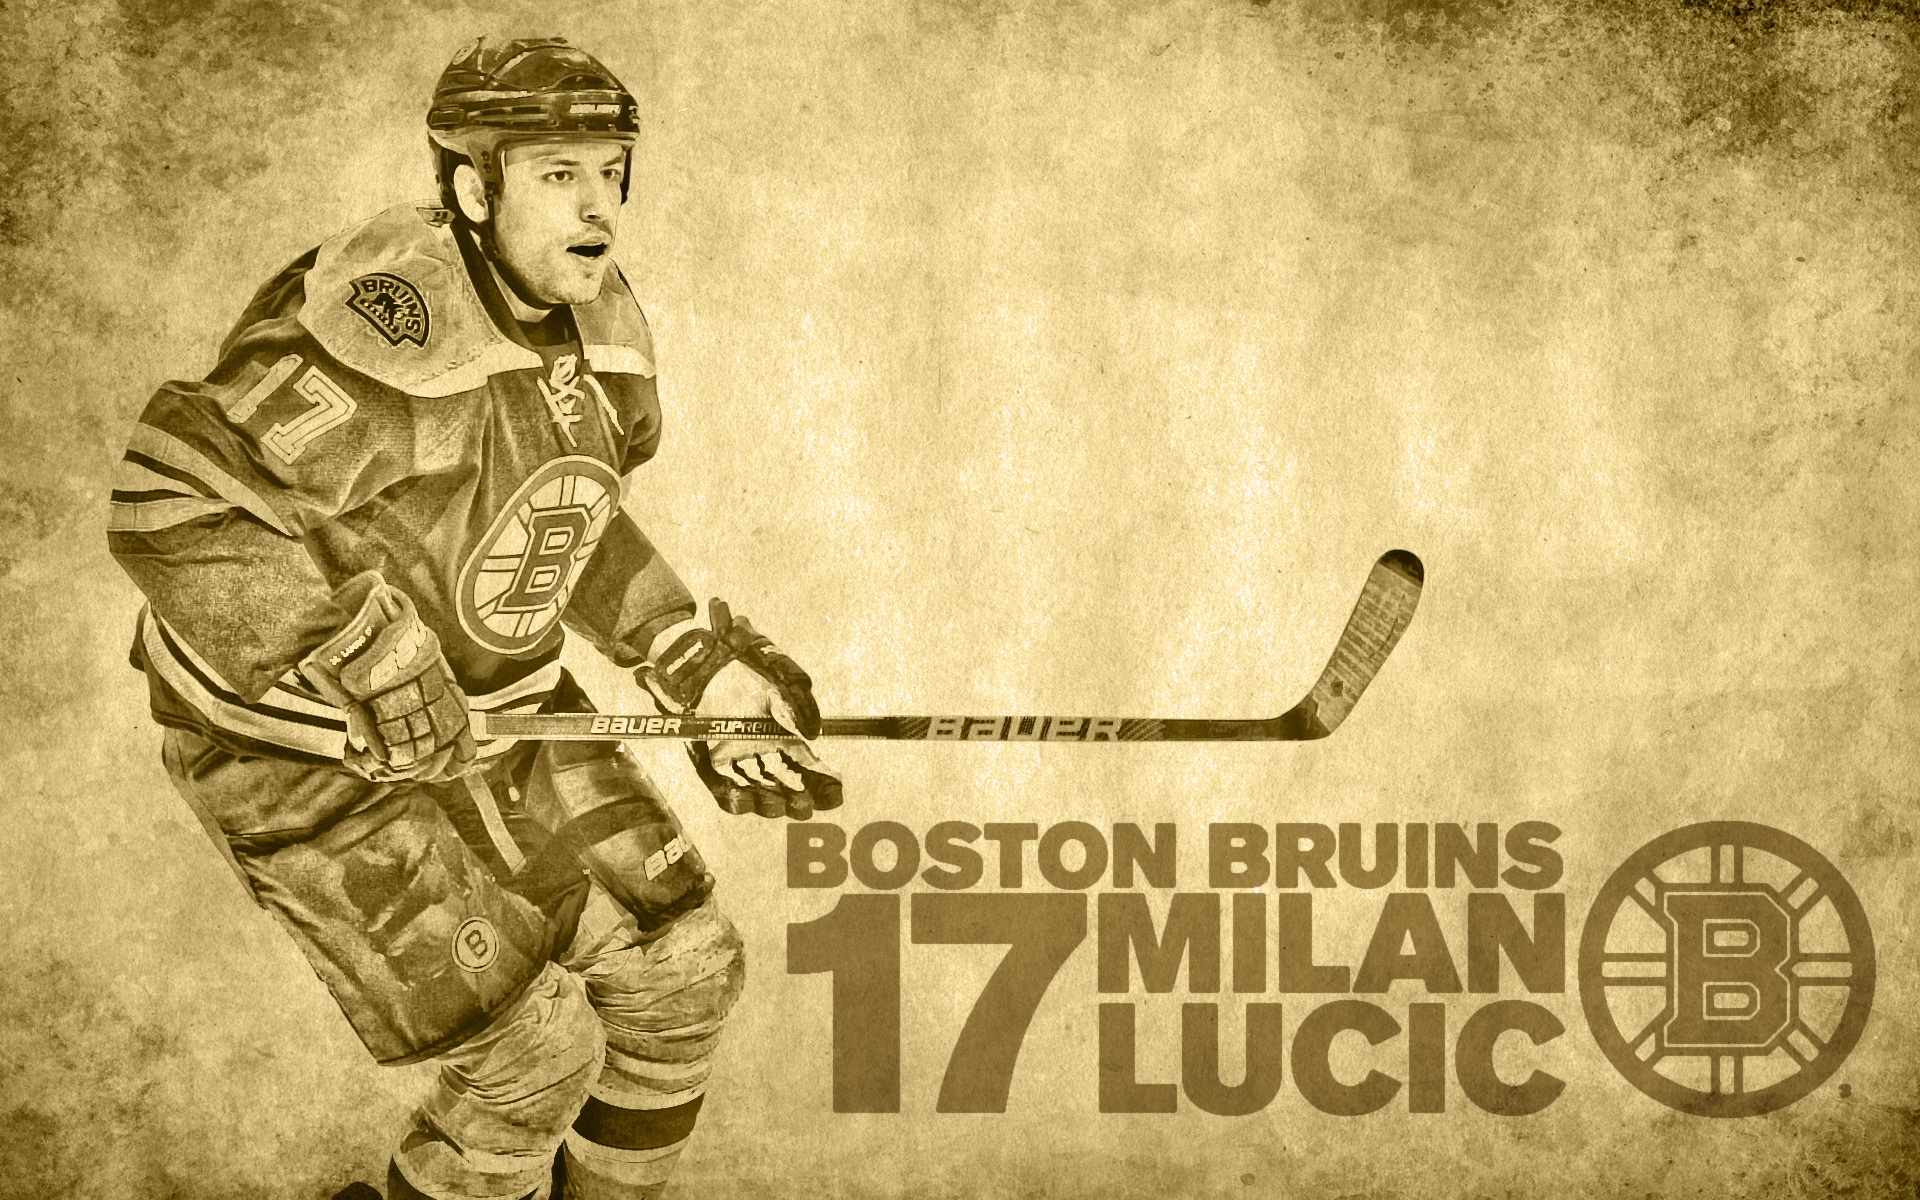 Boston Bruins Image Milan Lucic HD Wallpaper And Background